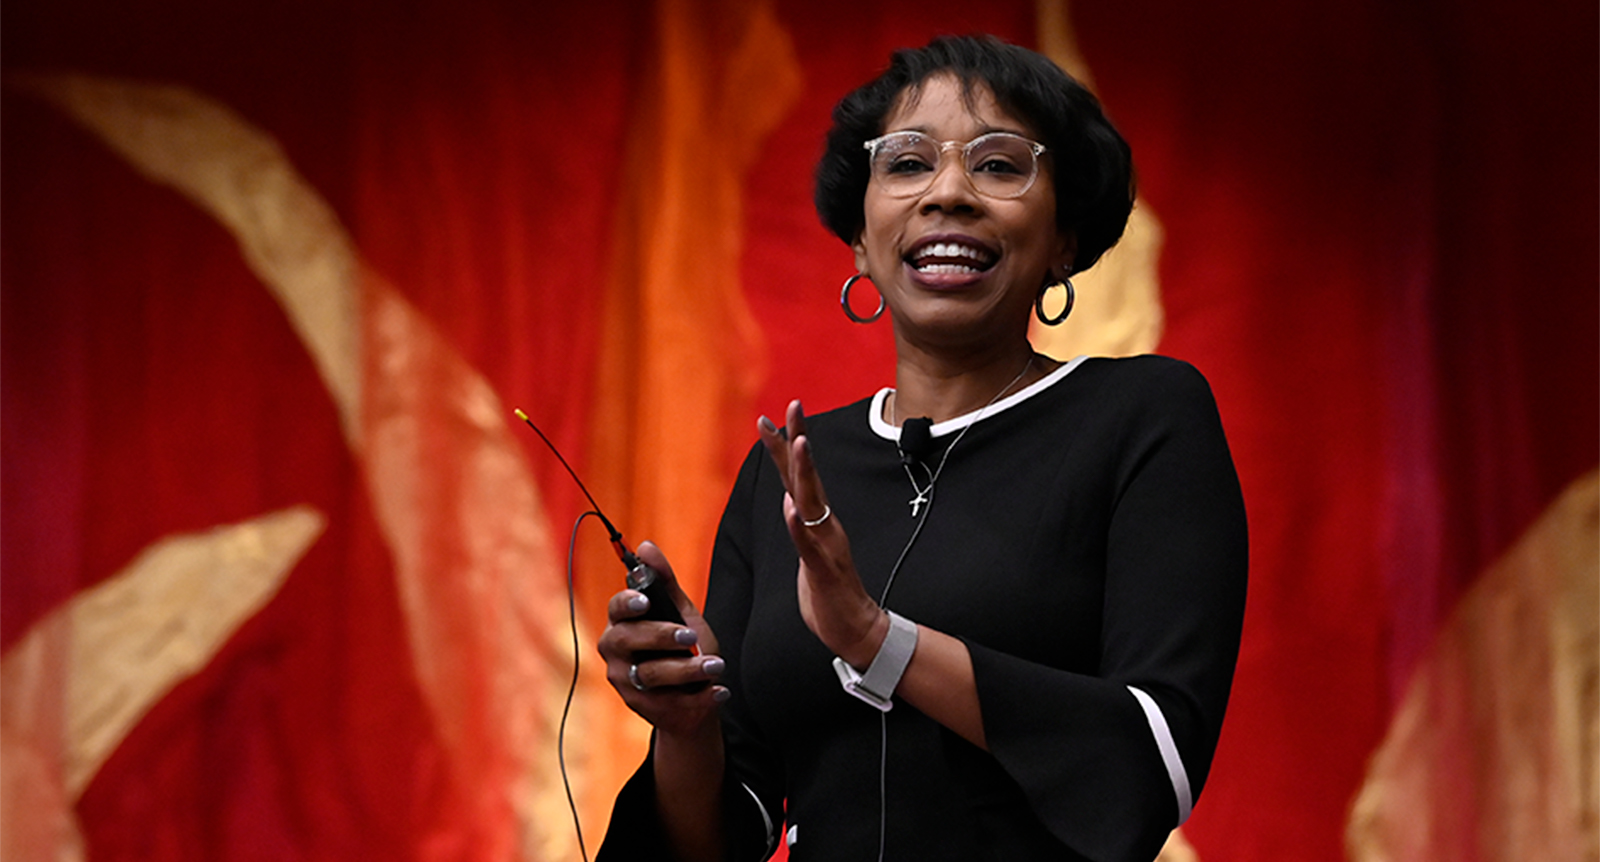 The Rev. Amantha Barbee, senior pastor at Oakhurst Presbyterian Church in Decatur, Ga., was plenary speaker Friday at Big Tent. (Photo by Rich Copley)